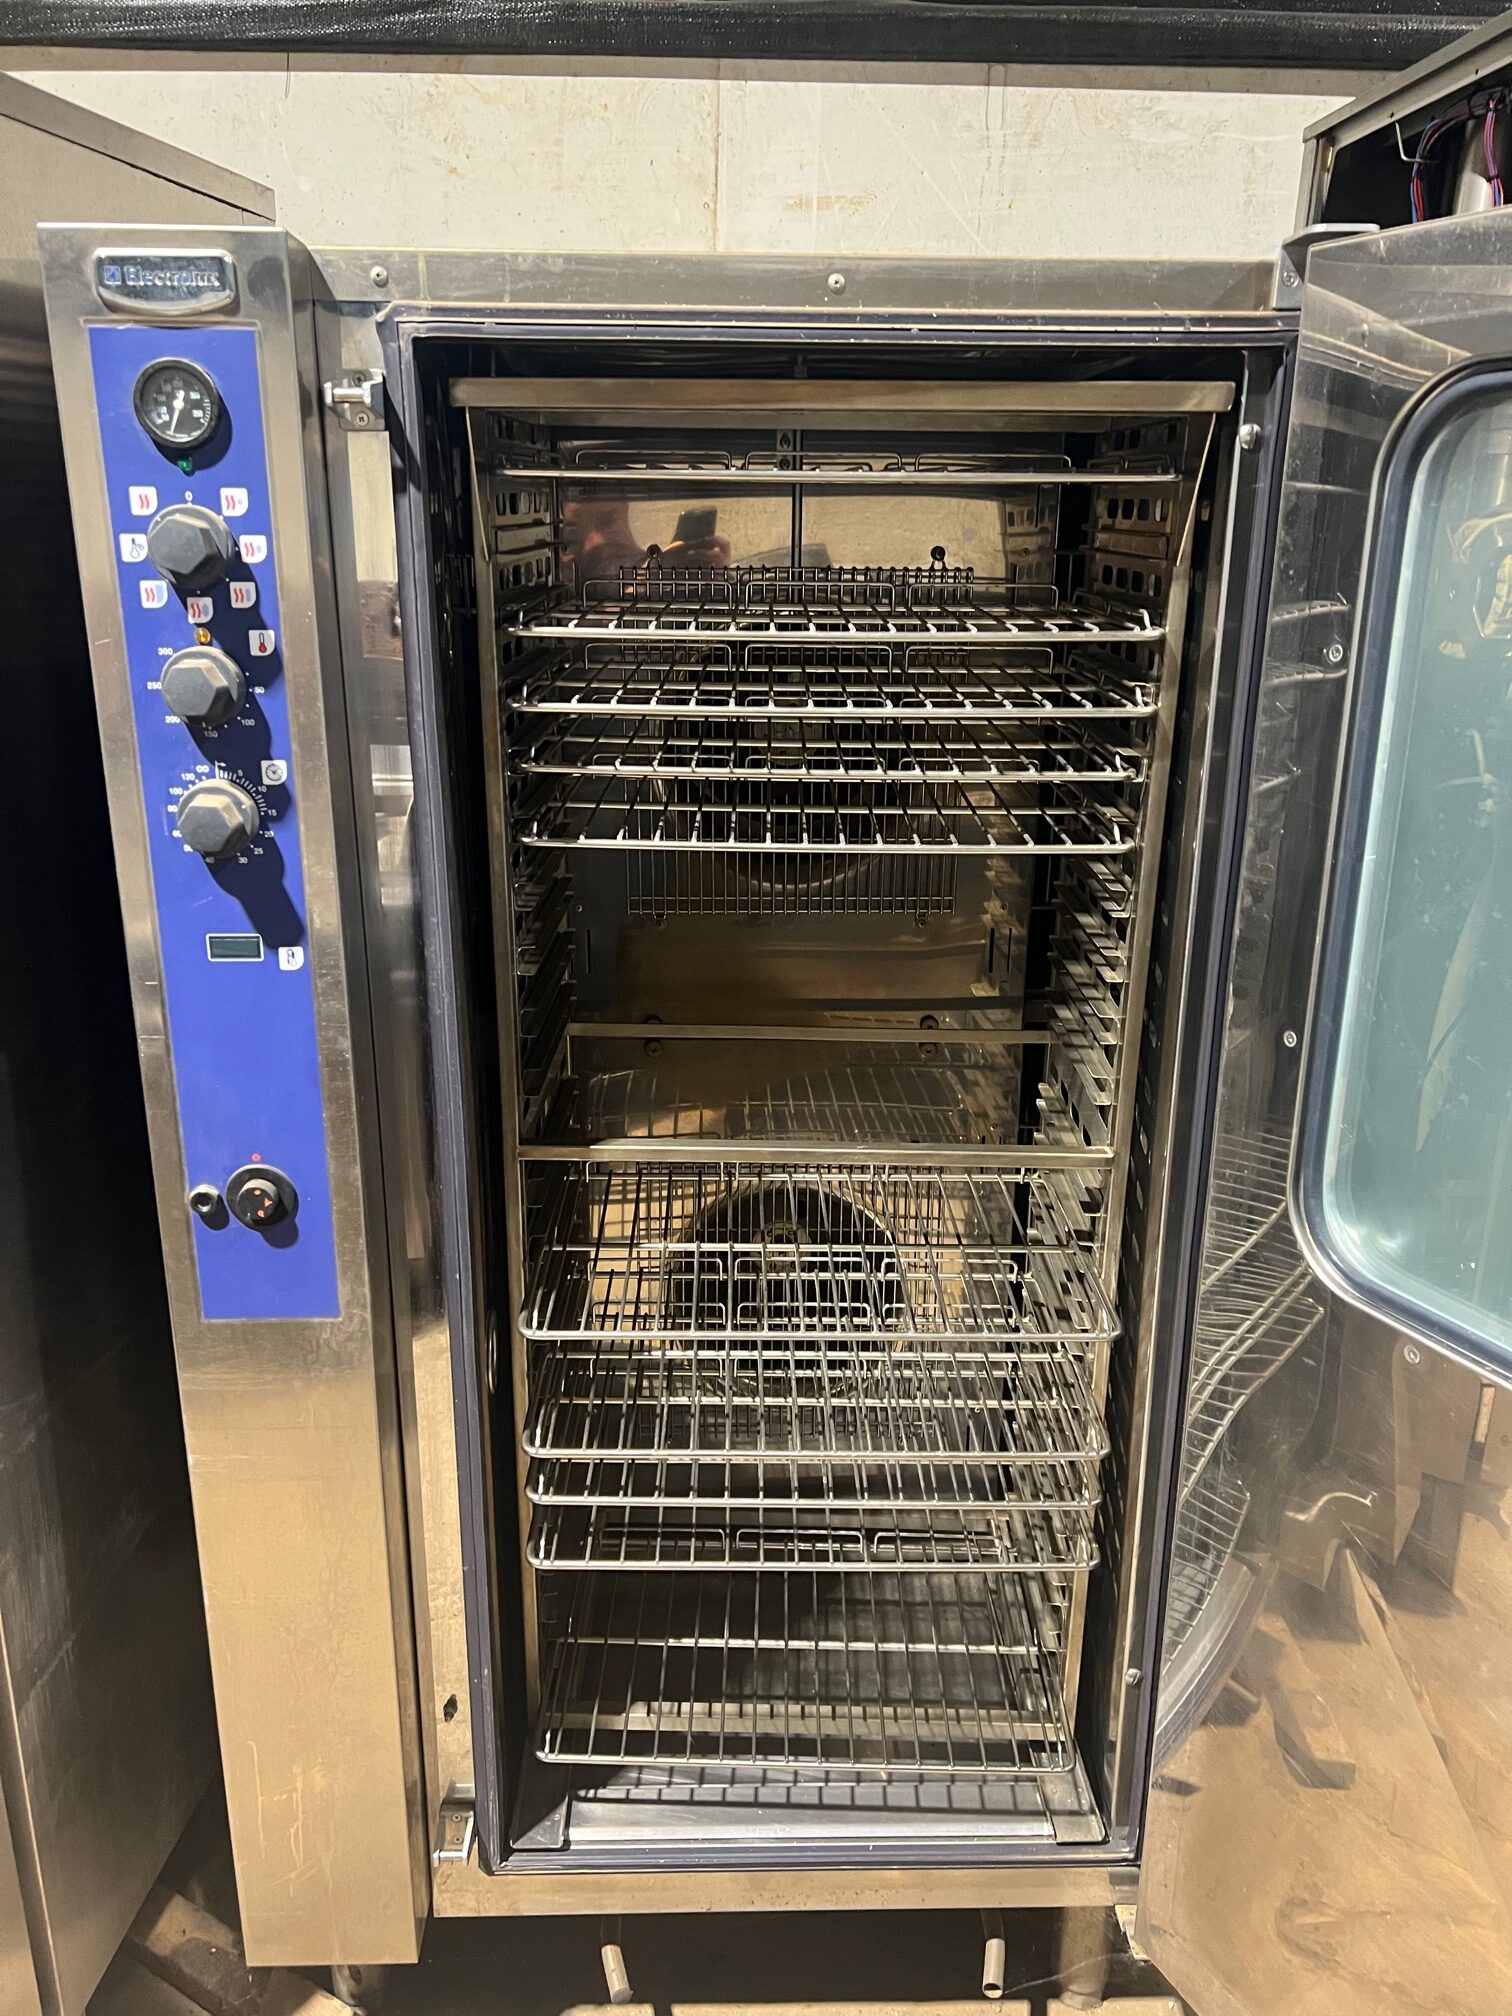 ELECTROLUX Crosswise 20 Grid Convection Oven with Humidity – CLEARANCE ITEM, Great Price.